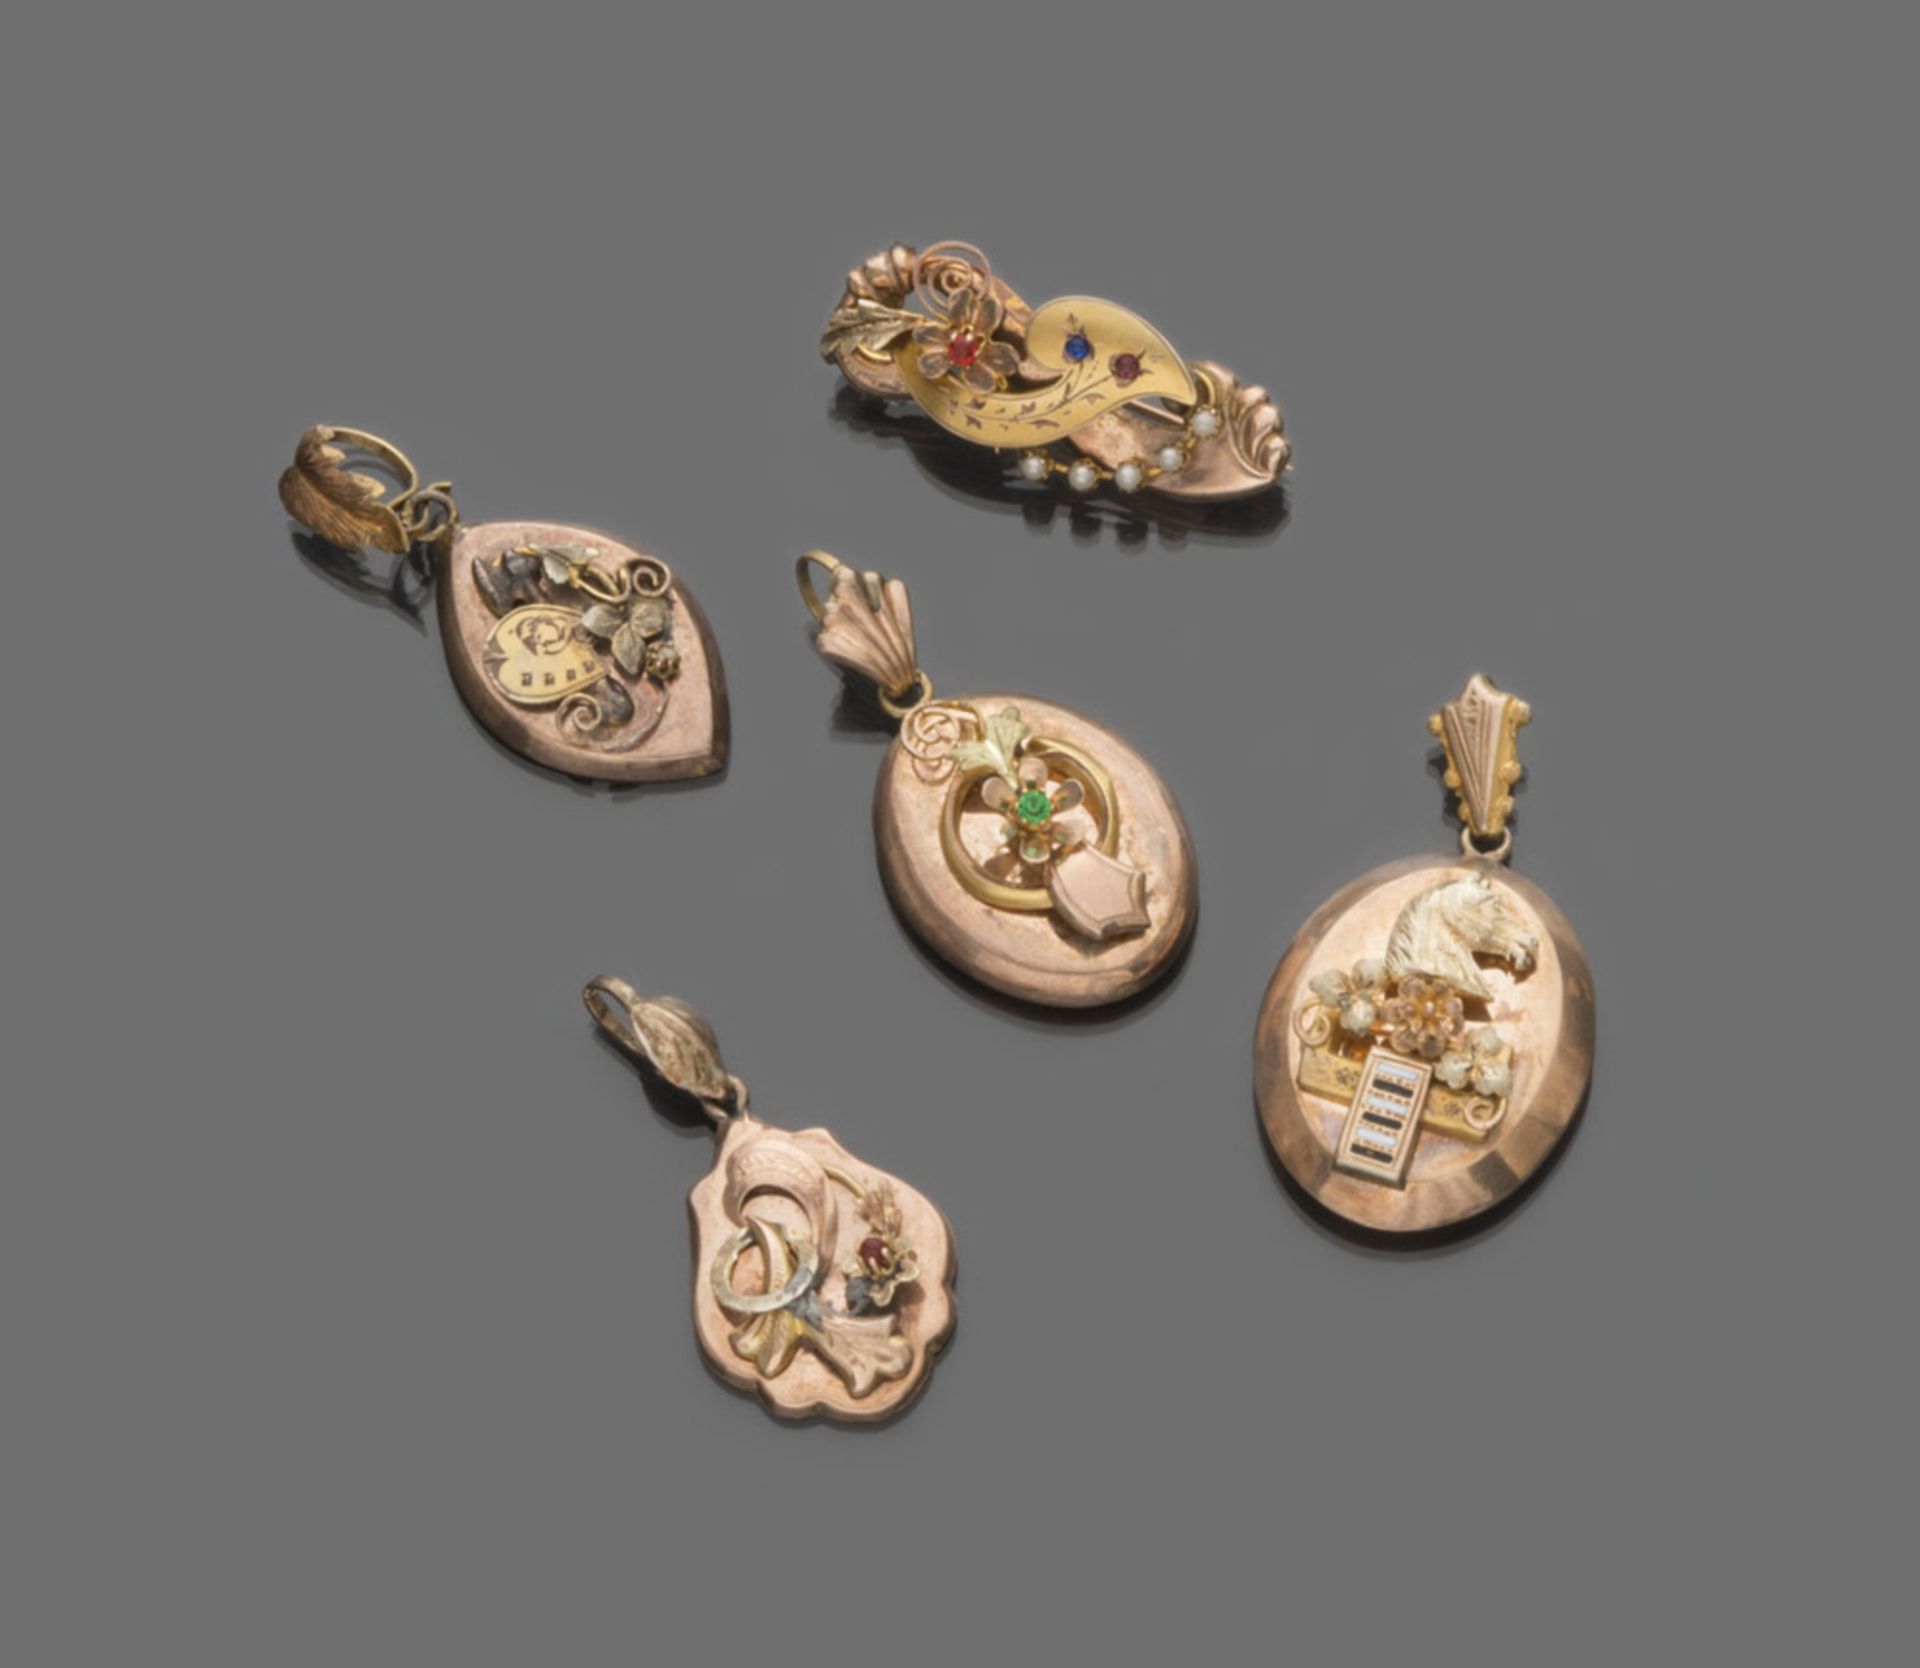 FOUR PENDANTS AND A BROOCH in low gold, with decorum of horse, shield and flowers